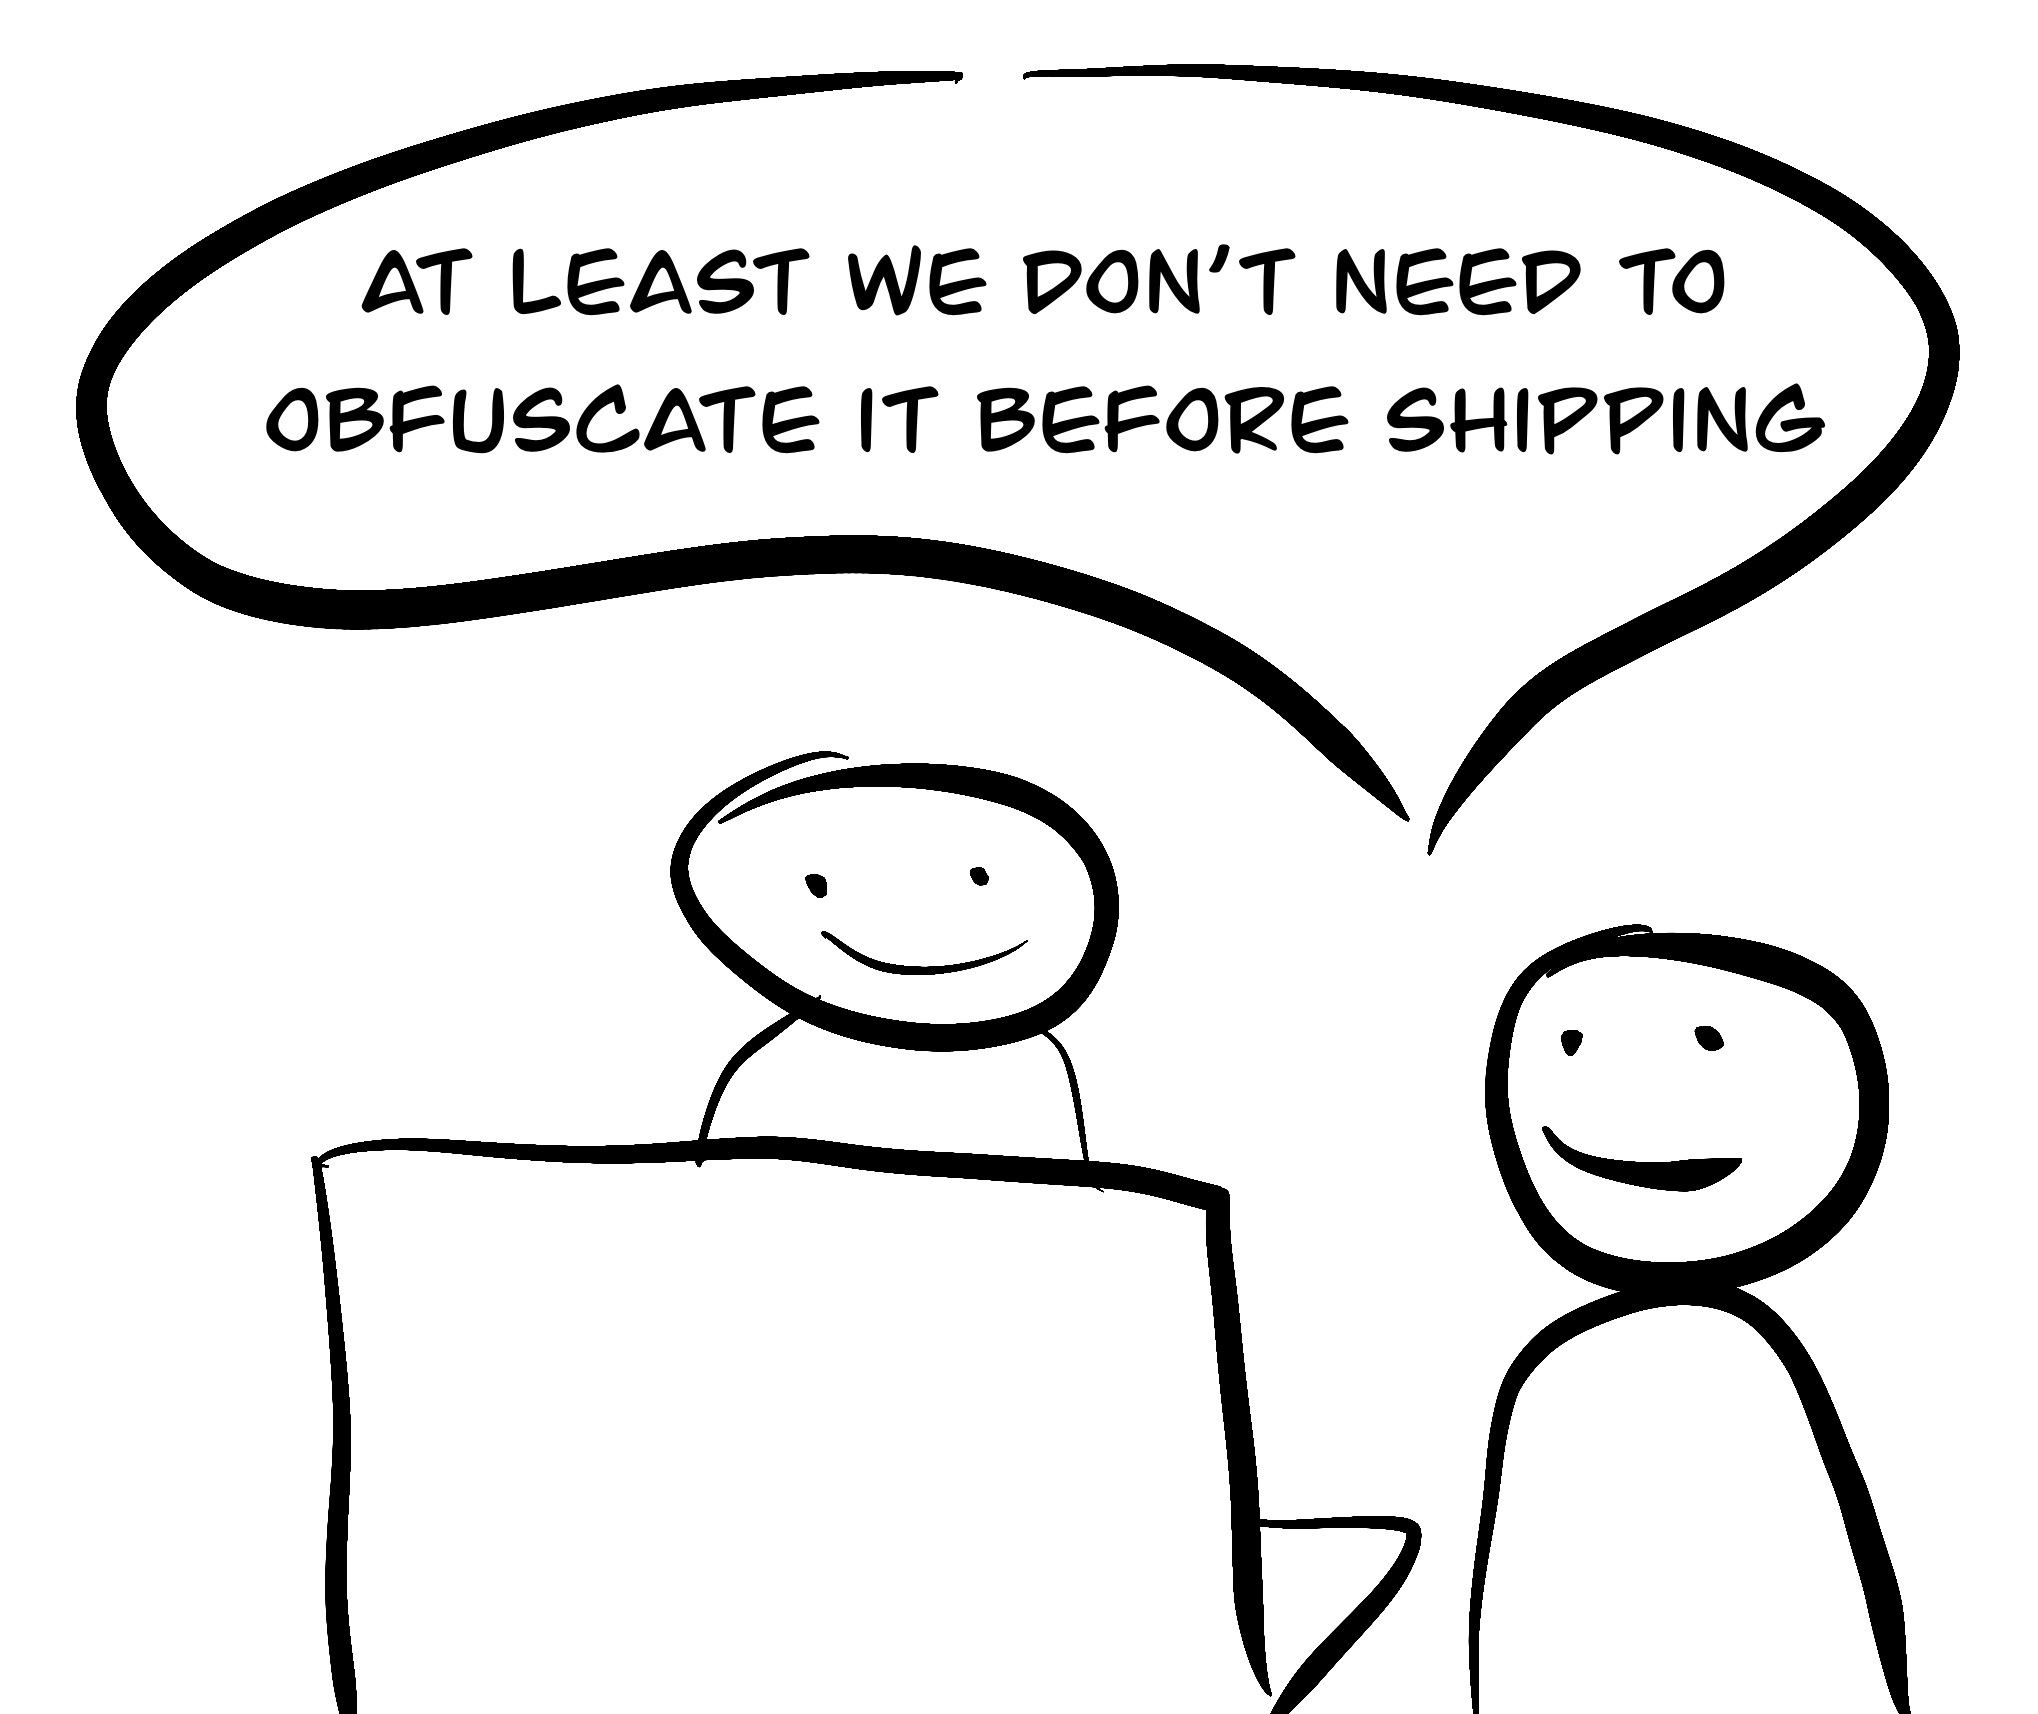 a joke where reviewer, looking for good parts, says: at least we don't need to obfuscate before shipping